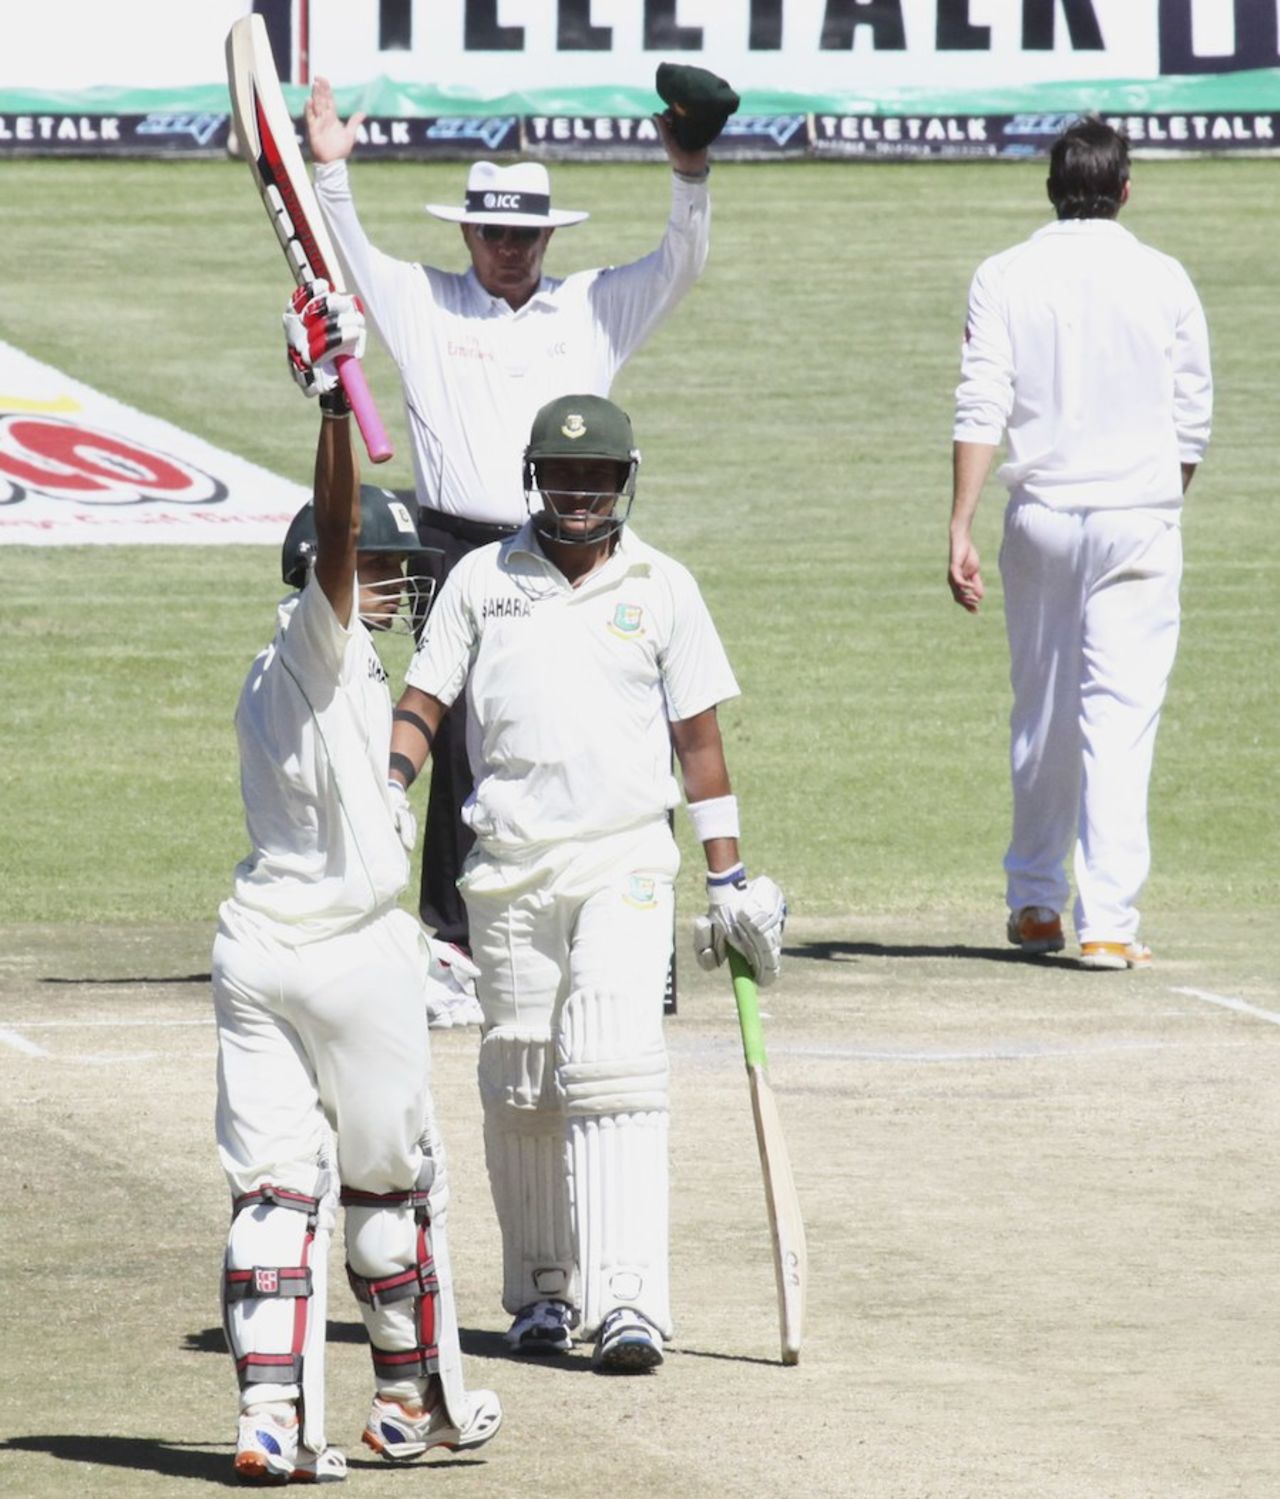 Nasir Hossain brought up his half-century with a six, Zimbabwe v Bangladesh, 2nd Test, Harare, 4th day, April 28, 2013